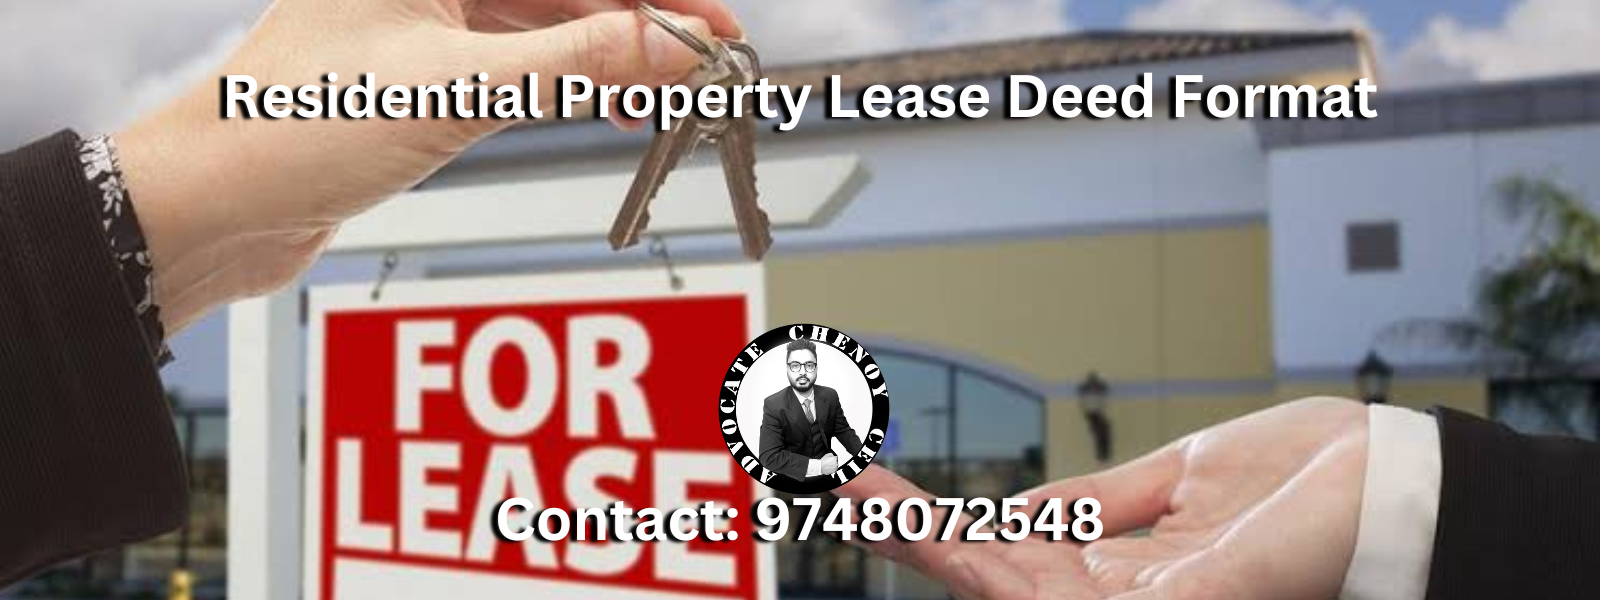 Residential Property Lease Deed Format